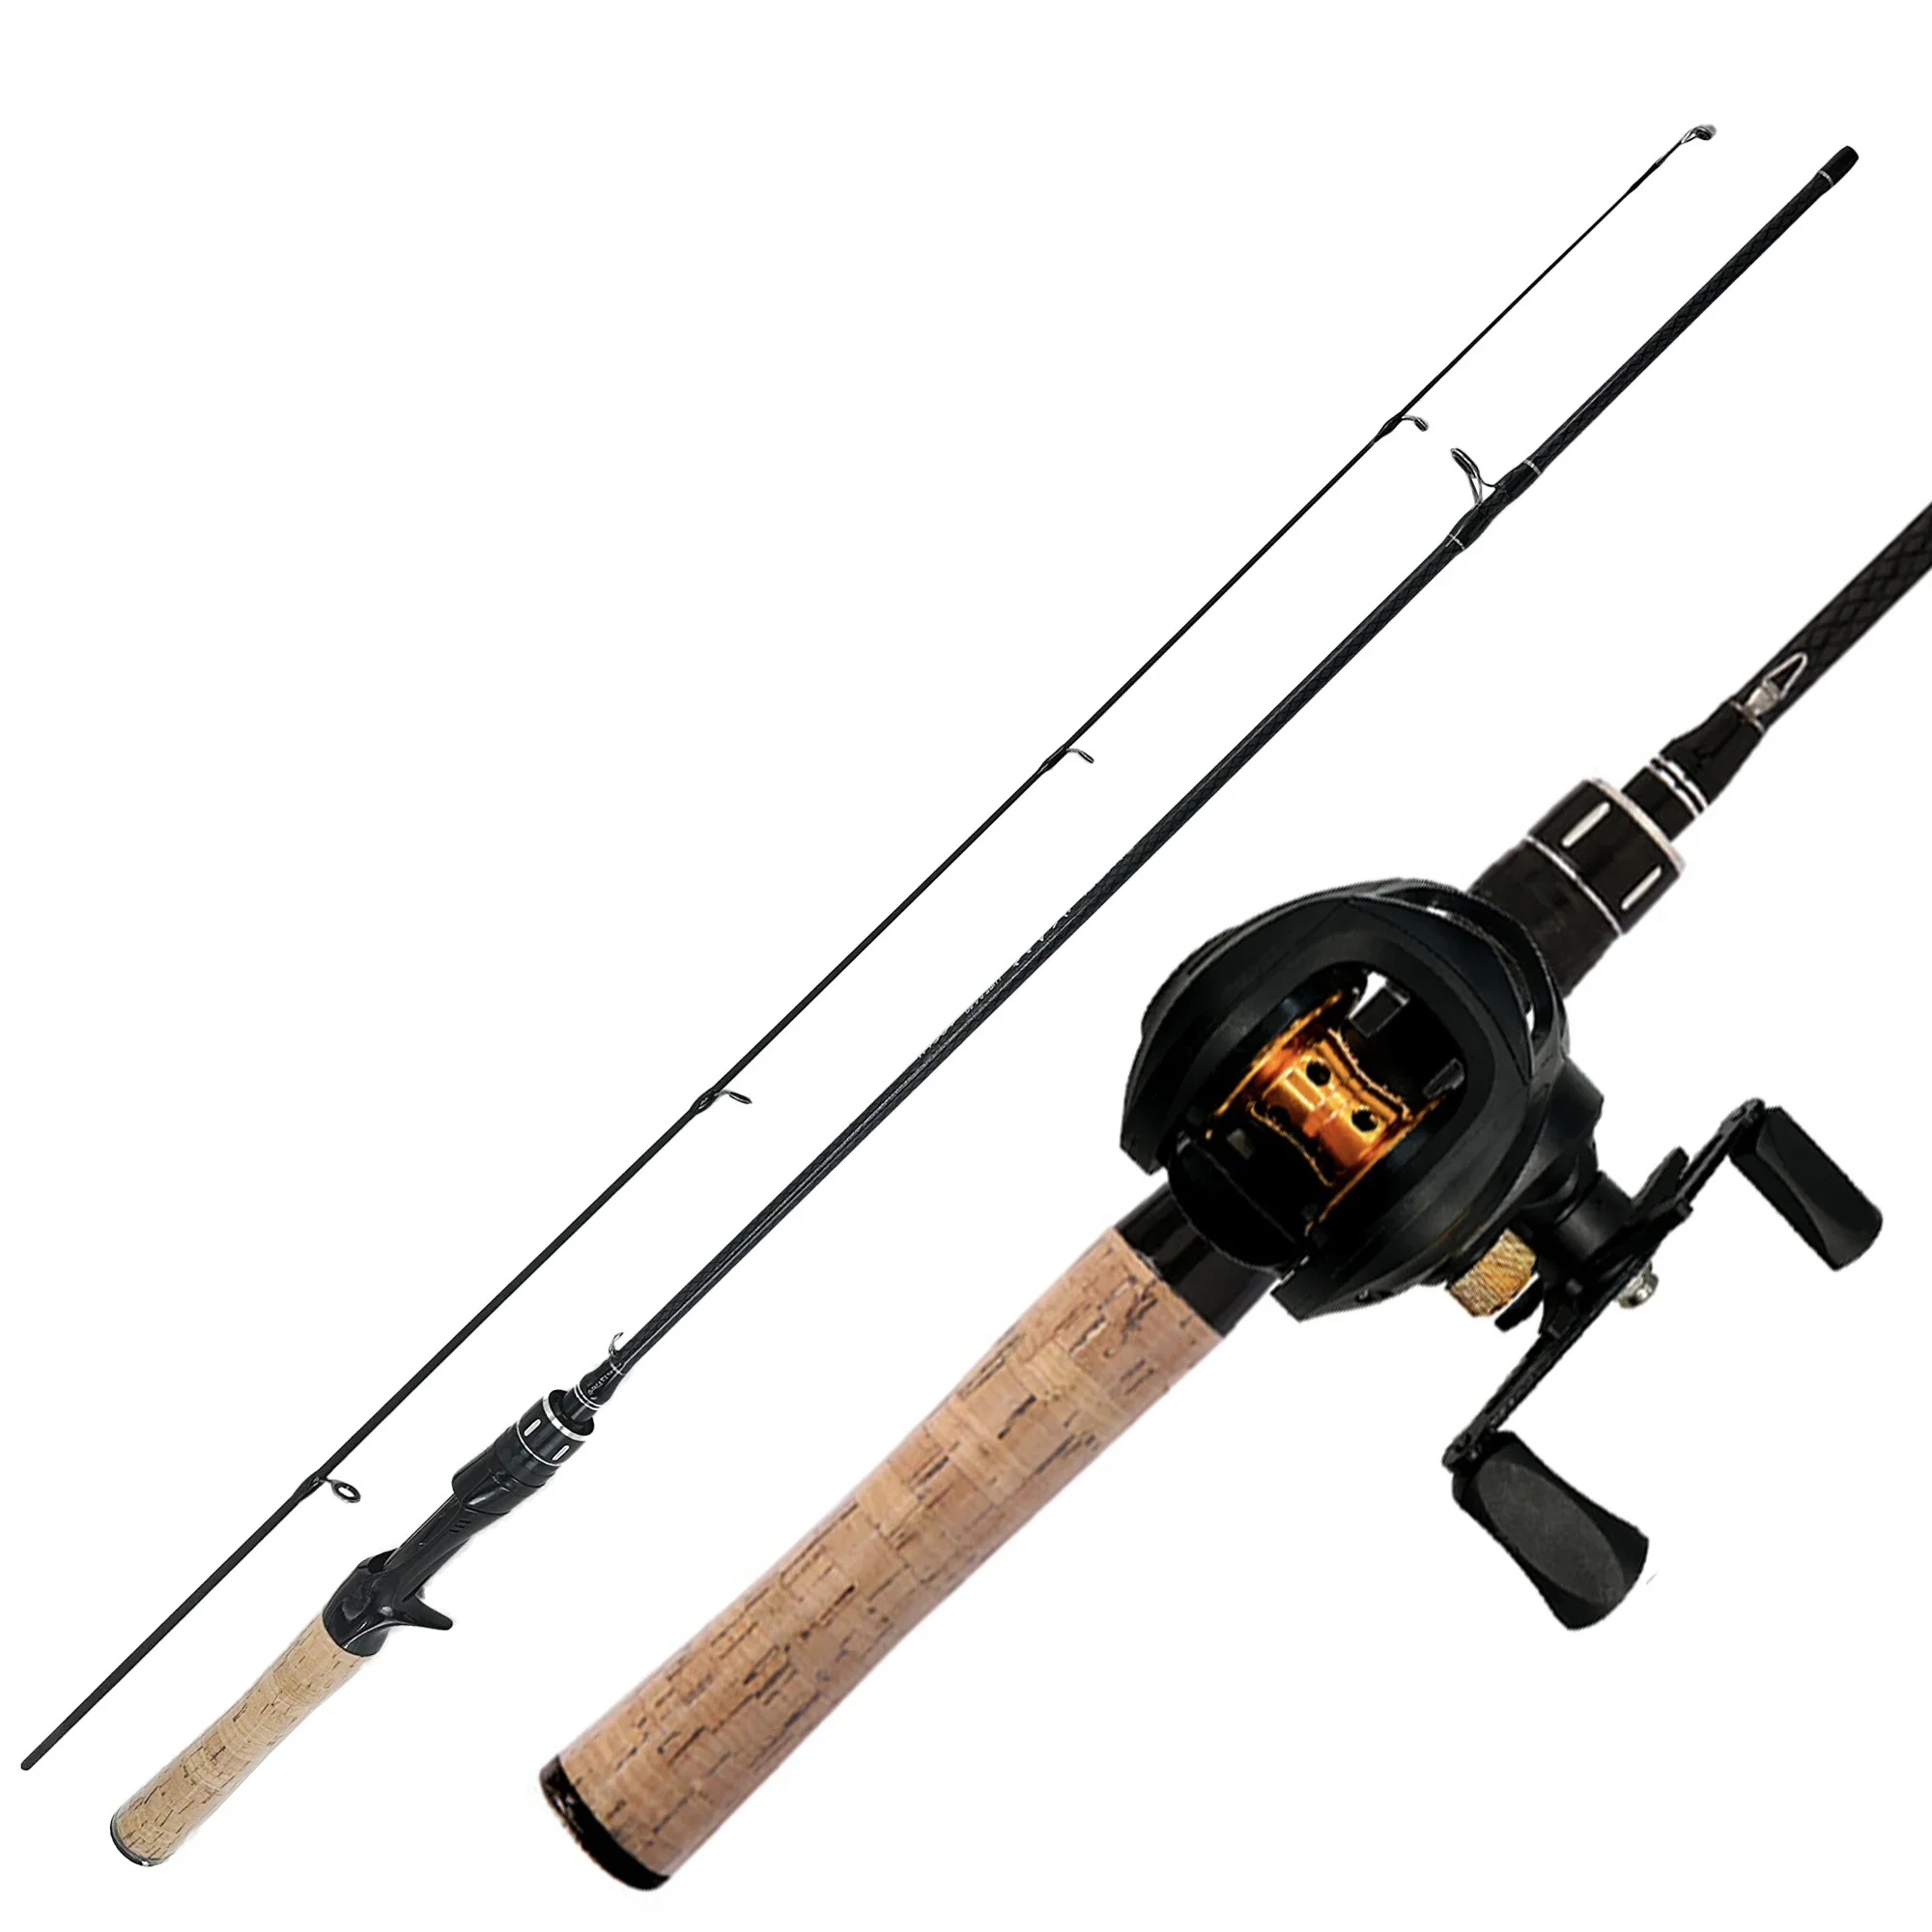 

Lure Casting Reel and Rod Set 1.65m 1.8m Baitcasting Reels Max Drag 8kg for Bass Pike Trout Fishing Tackle 2 Sections Pole